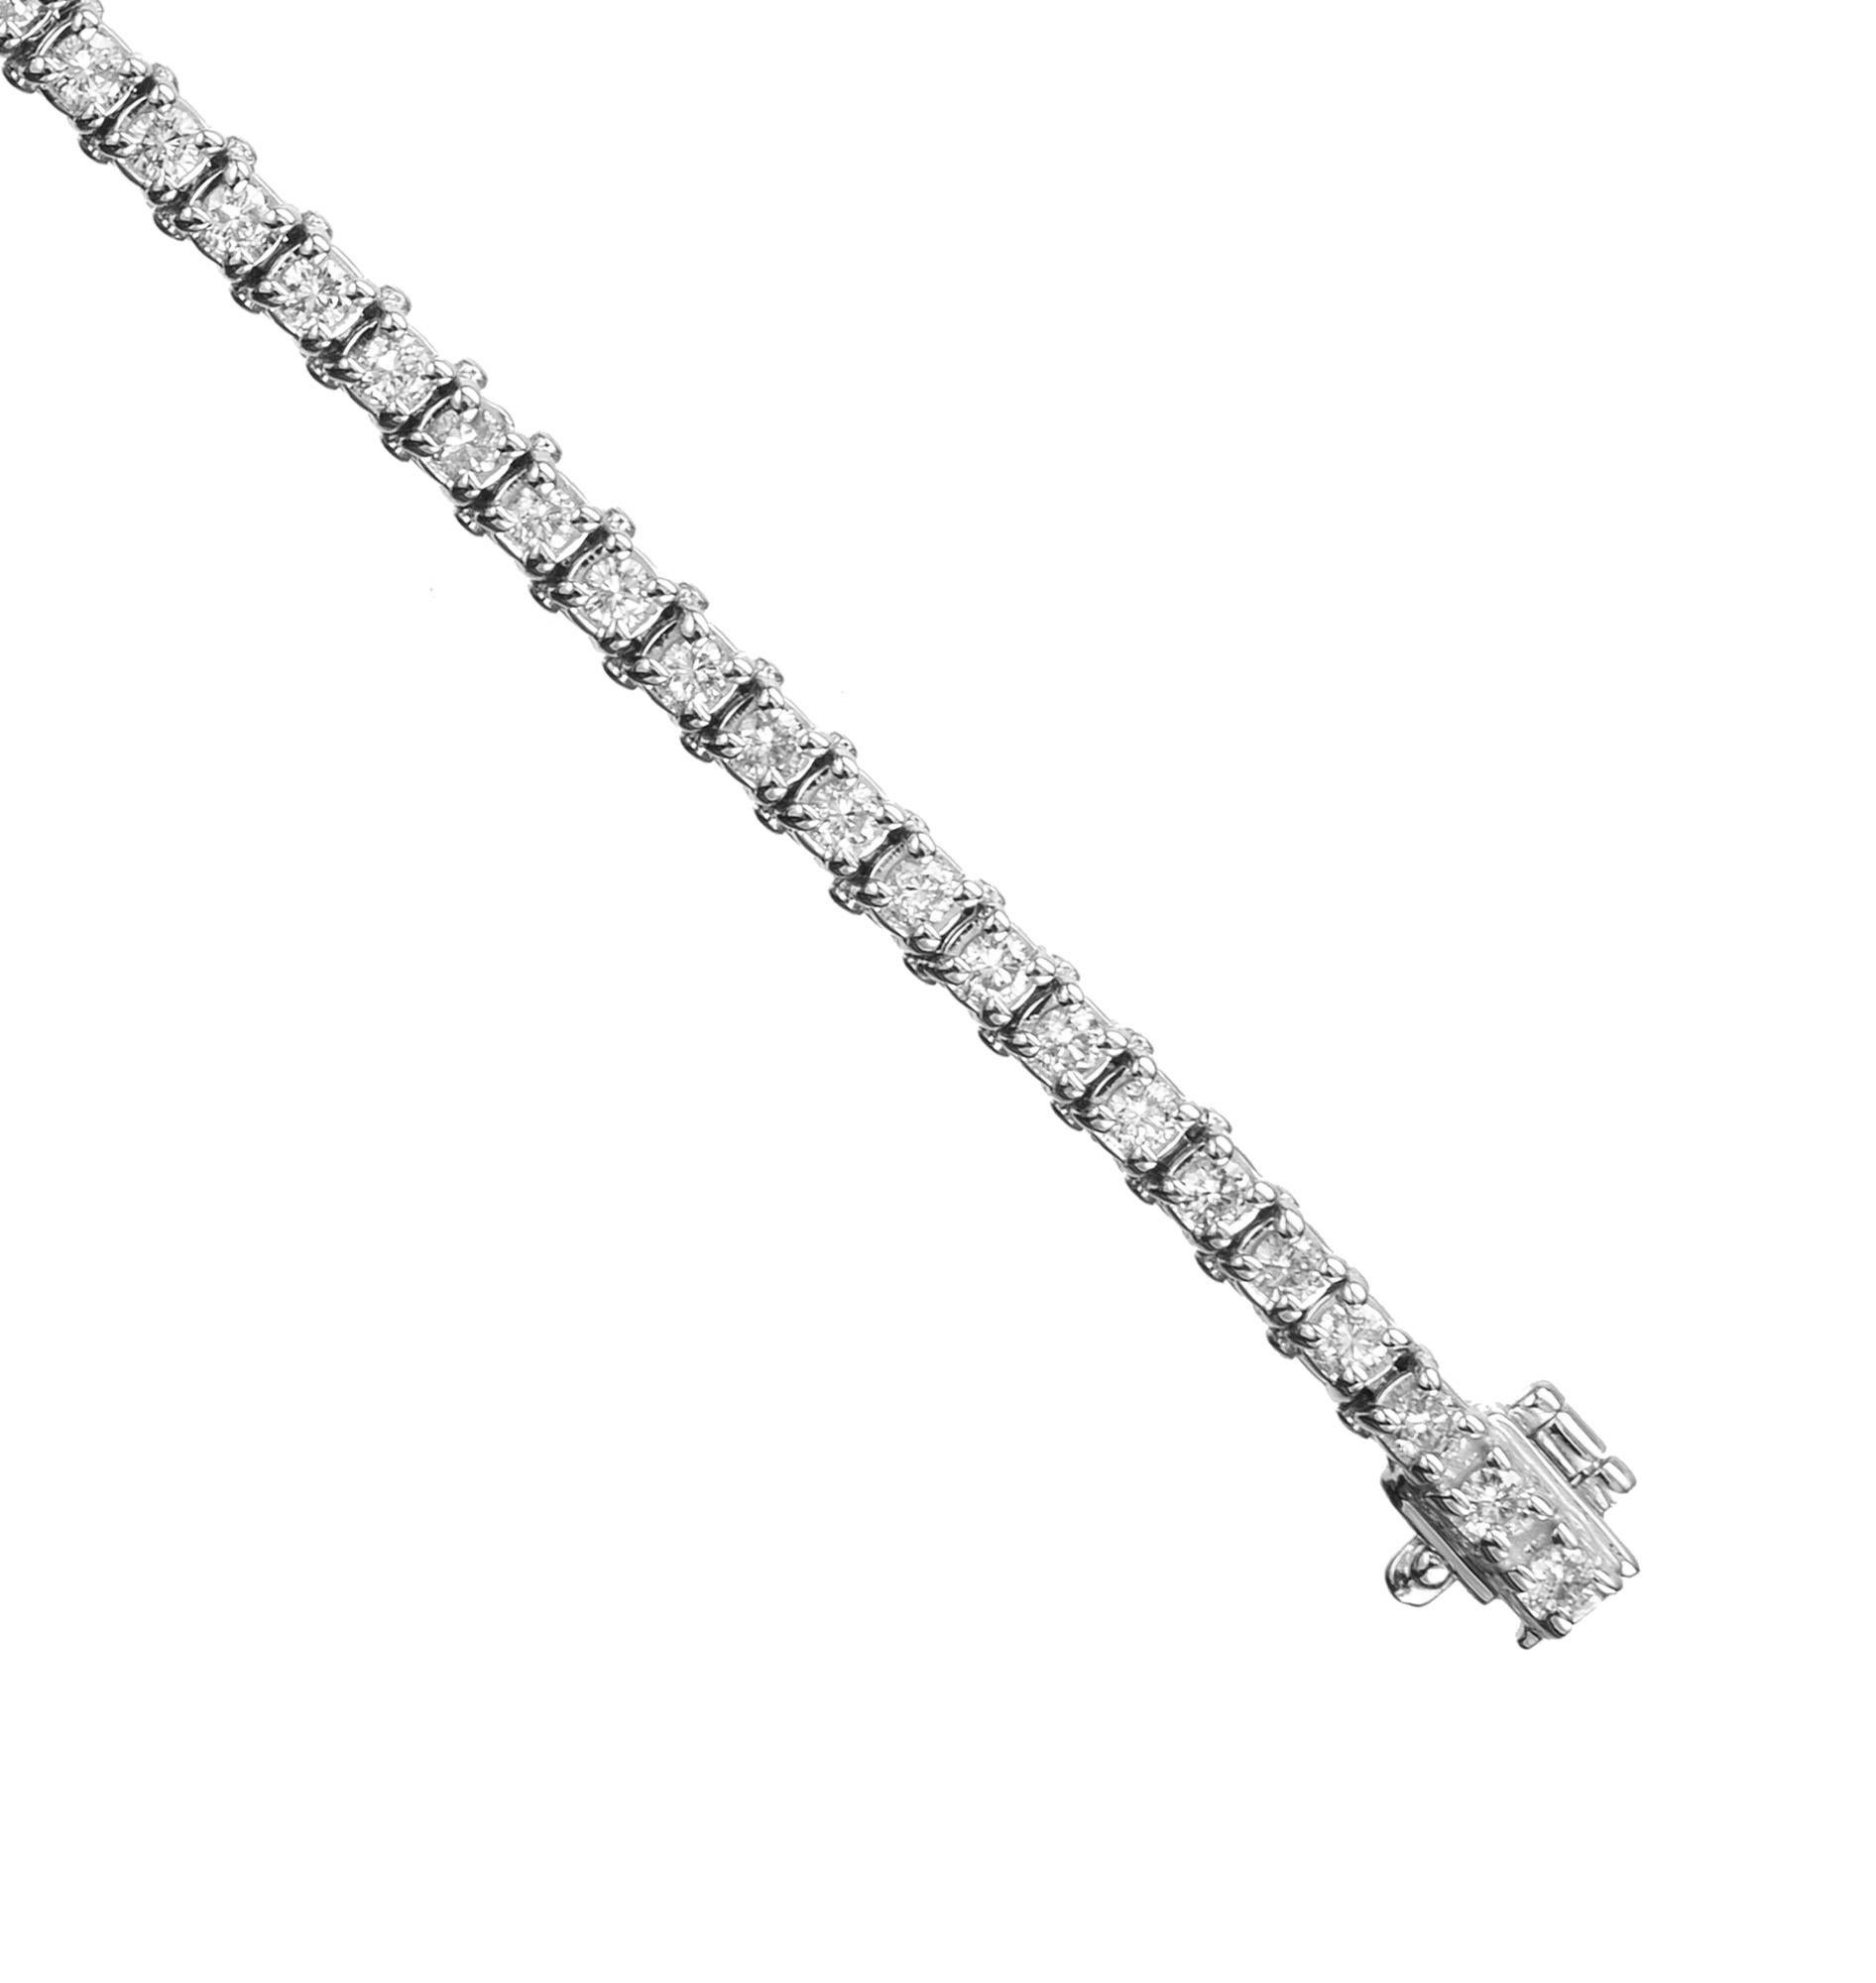 Classic diamond tennis bracelet. Adorned with 62 round brilliant cut diamonds totaling 1.60ct. that are set in 14k white gold. The diamonds radiate with brilliance and sparkle, catching the light with every movement. This bracelet is a perfect